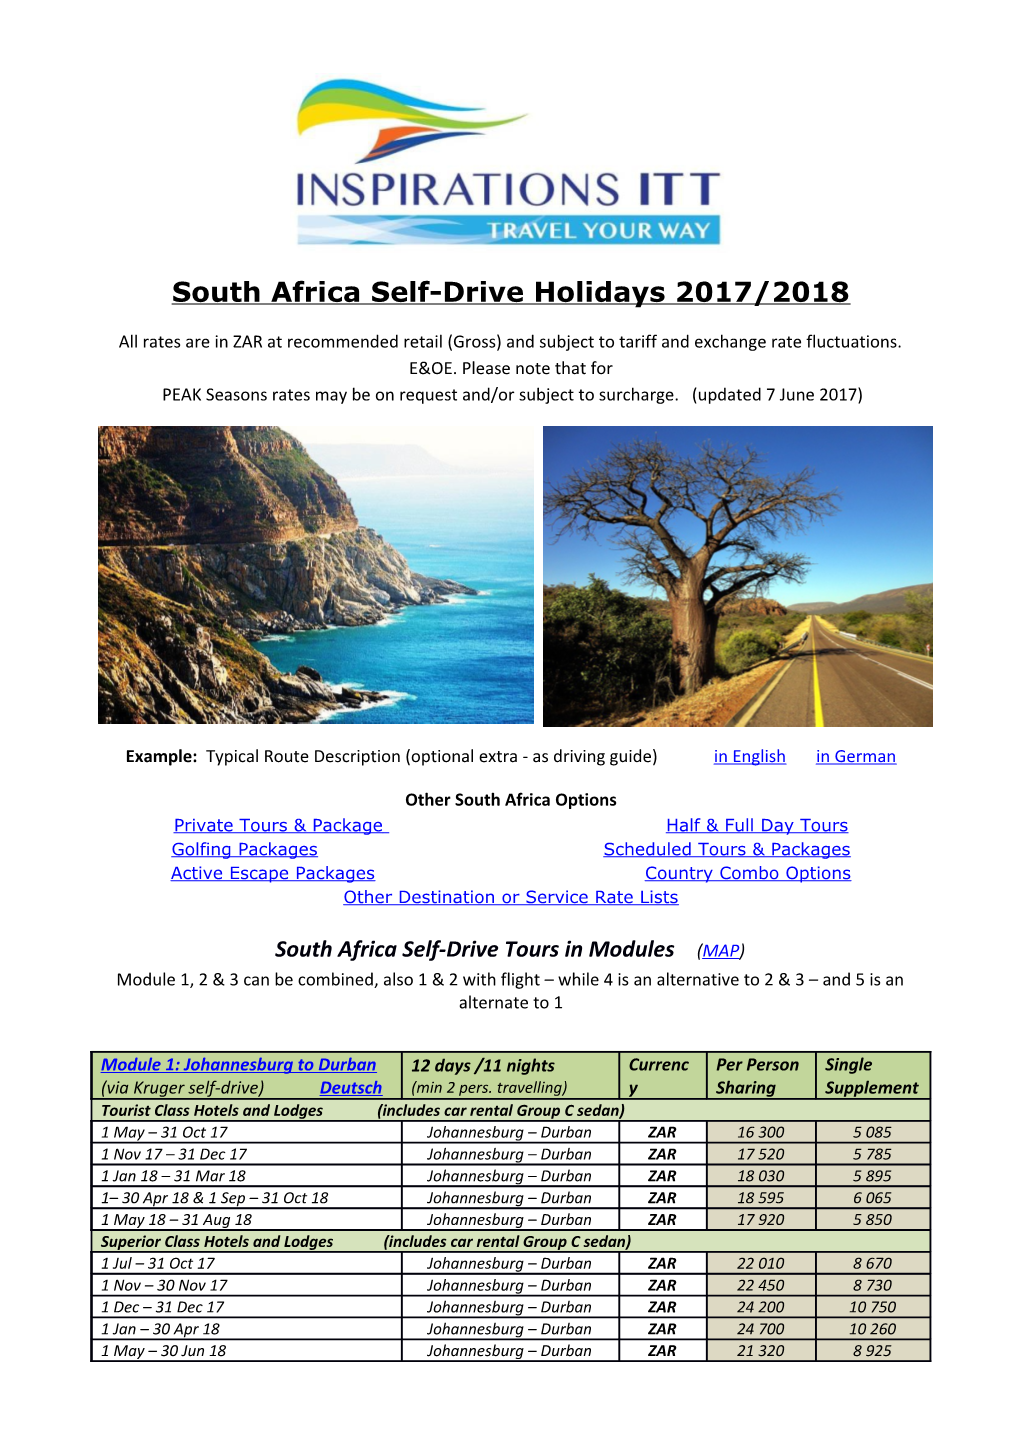 South Africa Self-Drive Holidays 2017/2018